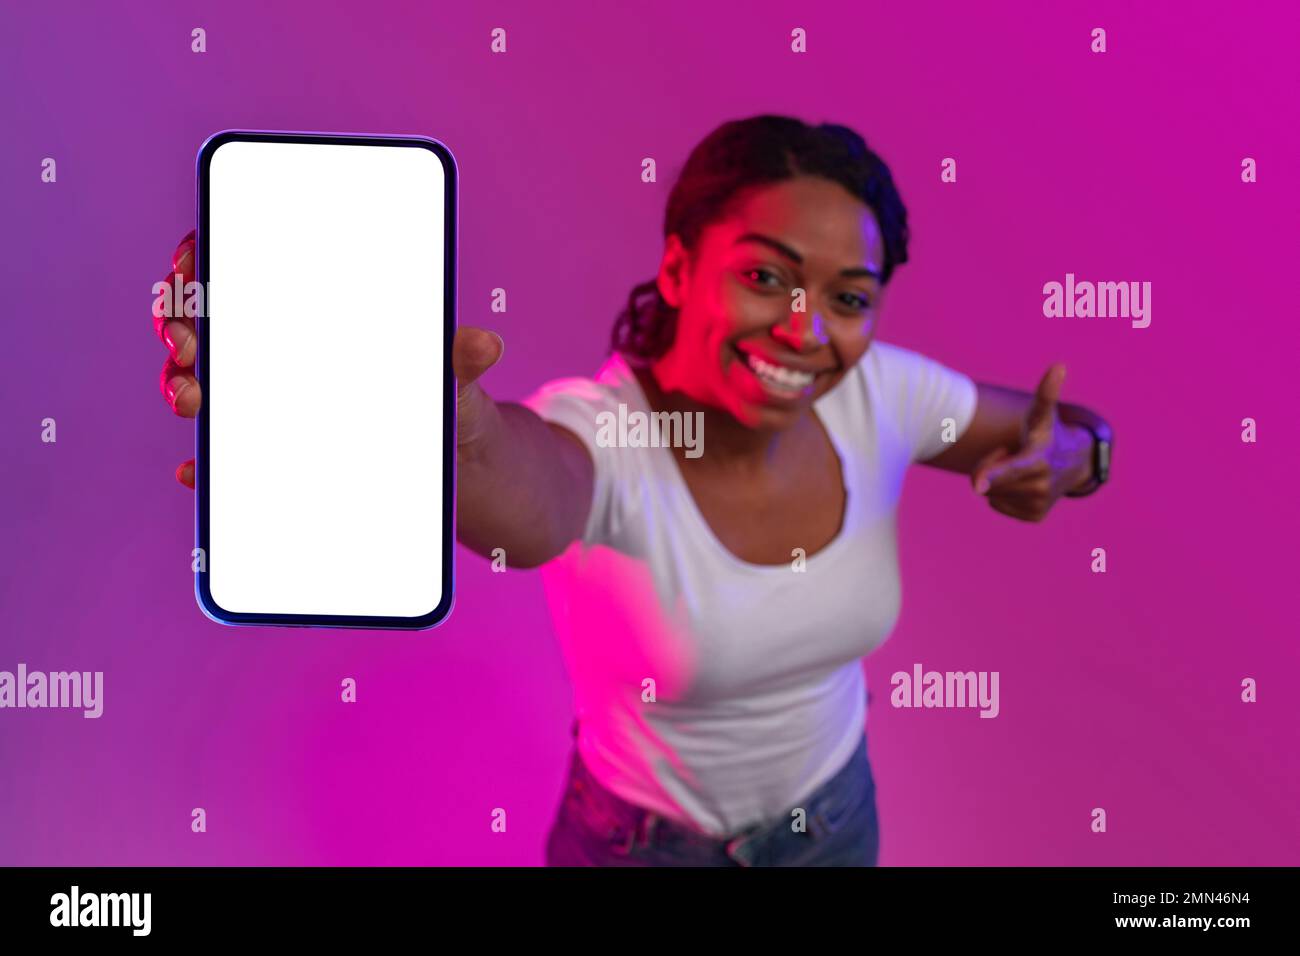 Cheerful black woman showing smartphone with empty white screen in neon light Stock Photo